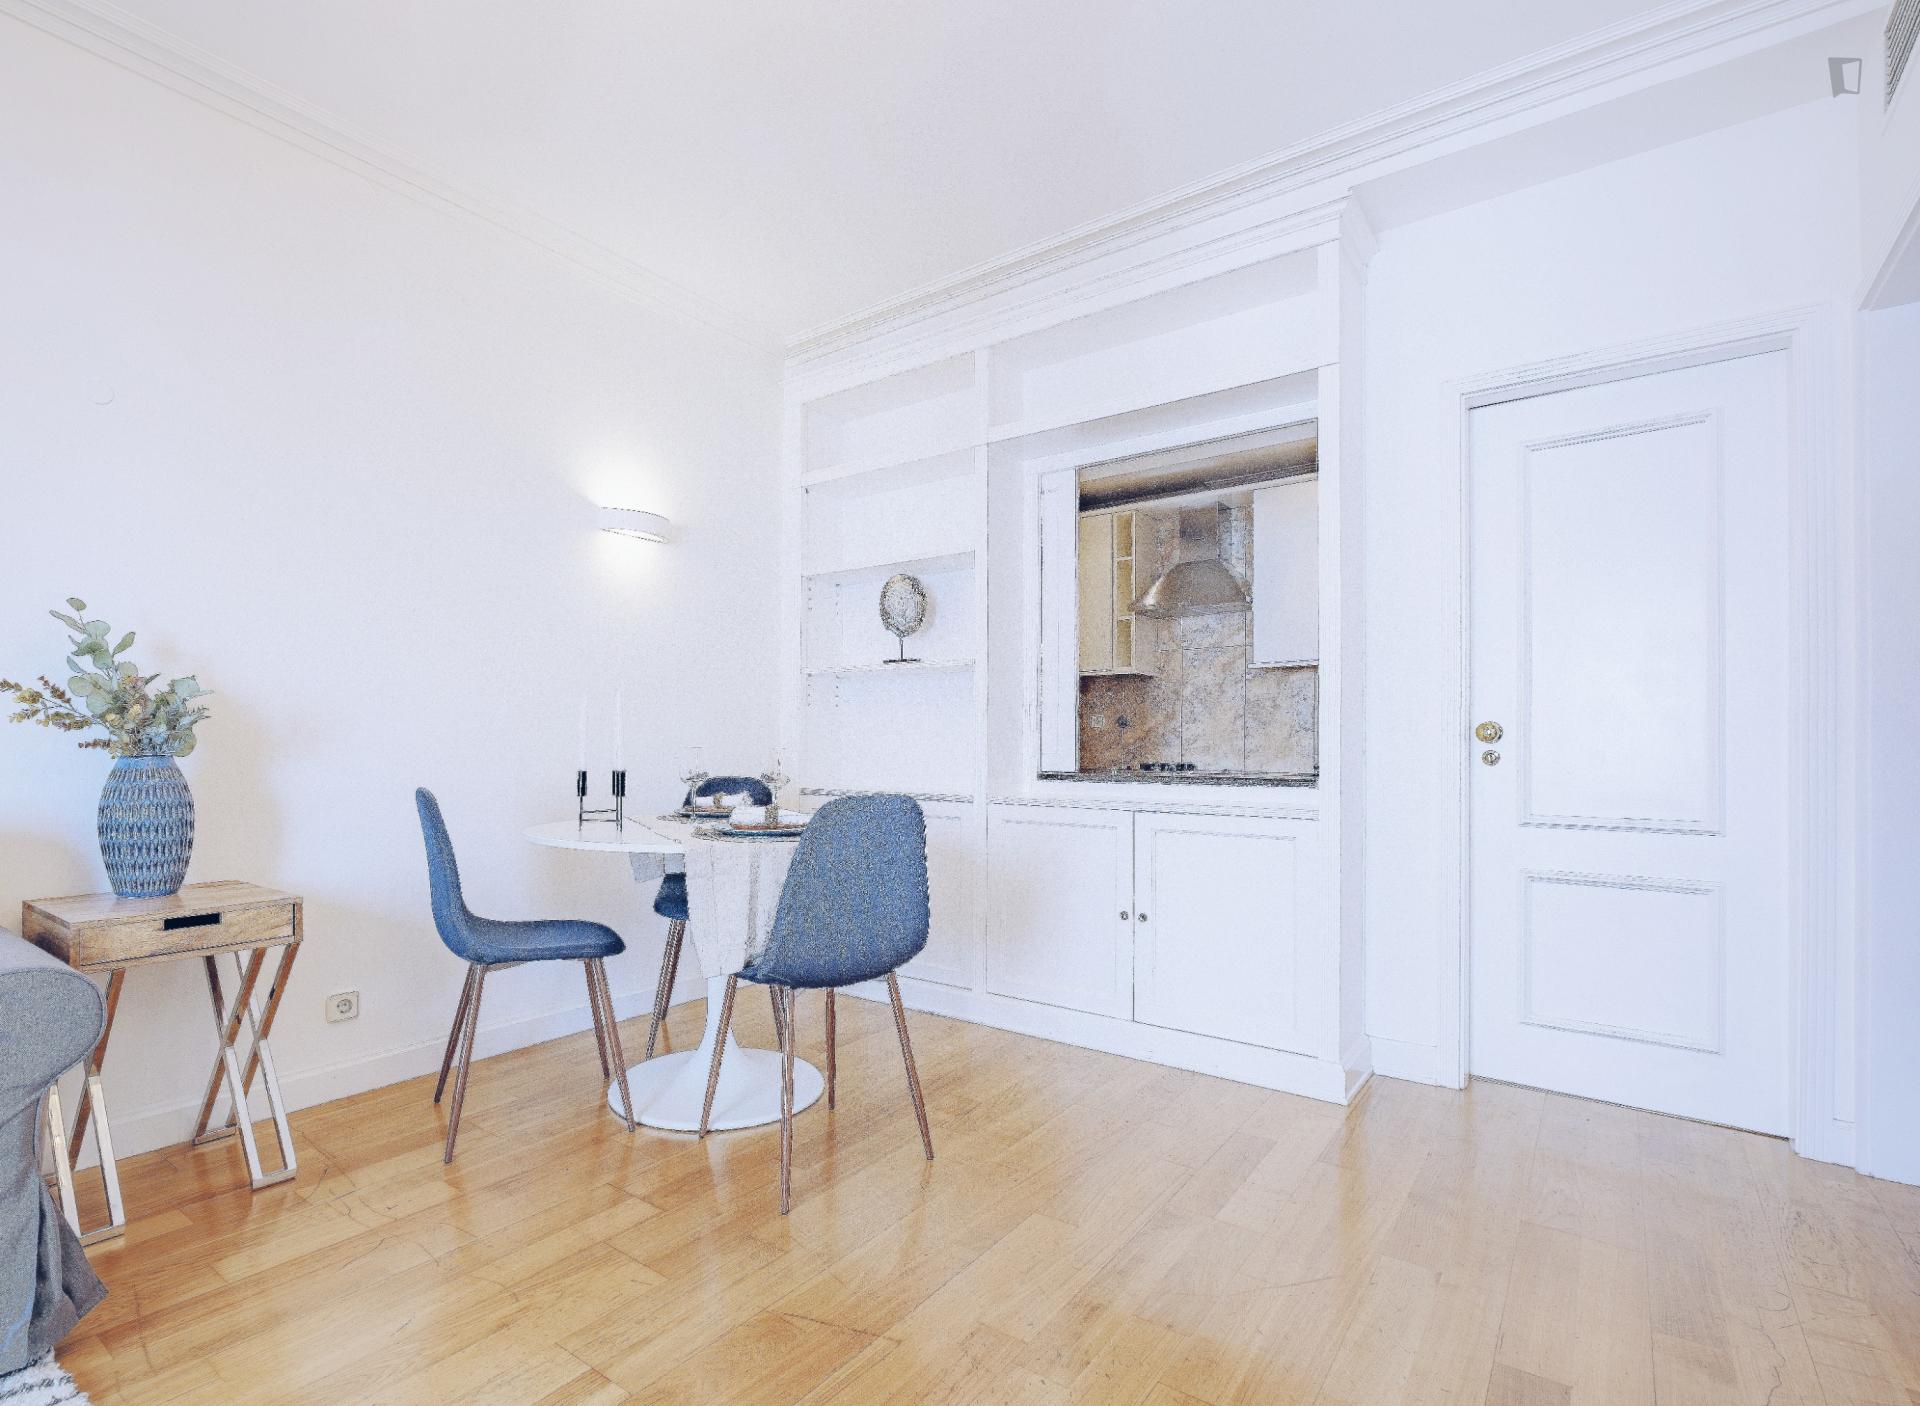 Valmor 2 - Clean and Luxurious apartment Lisbon